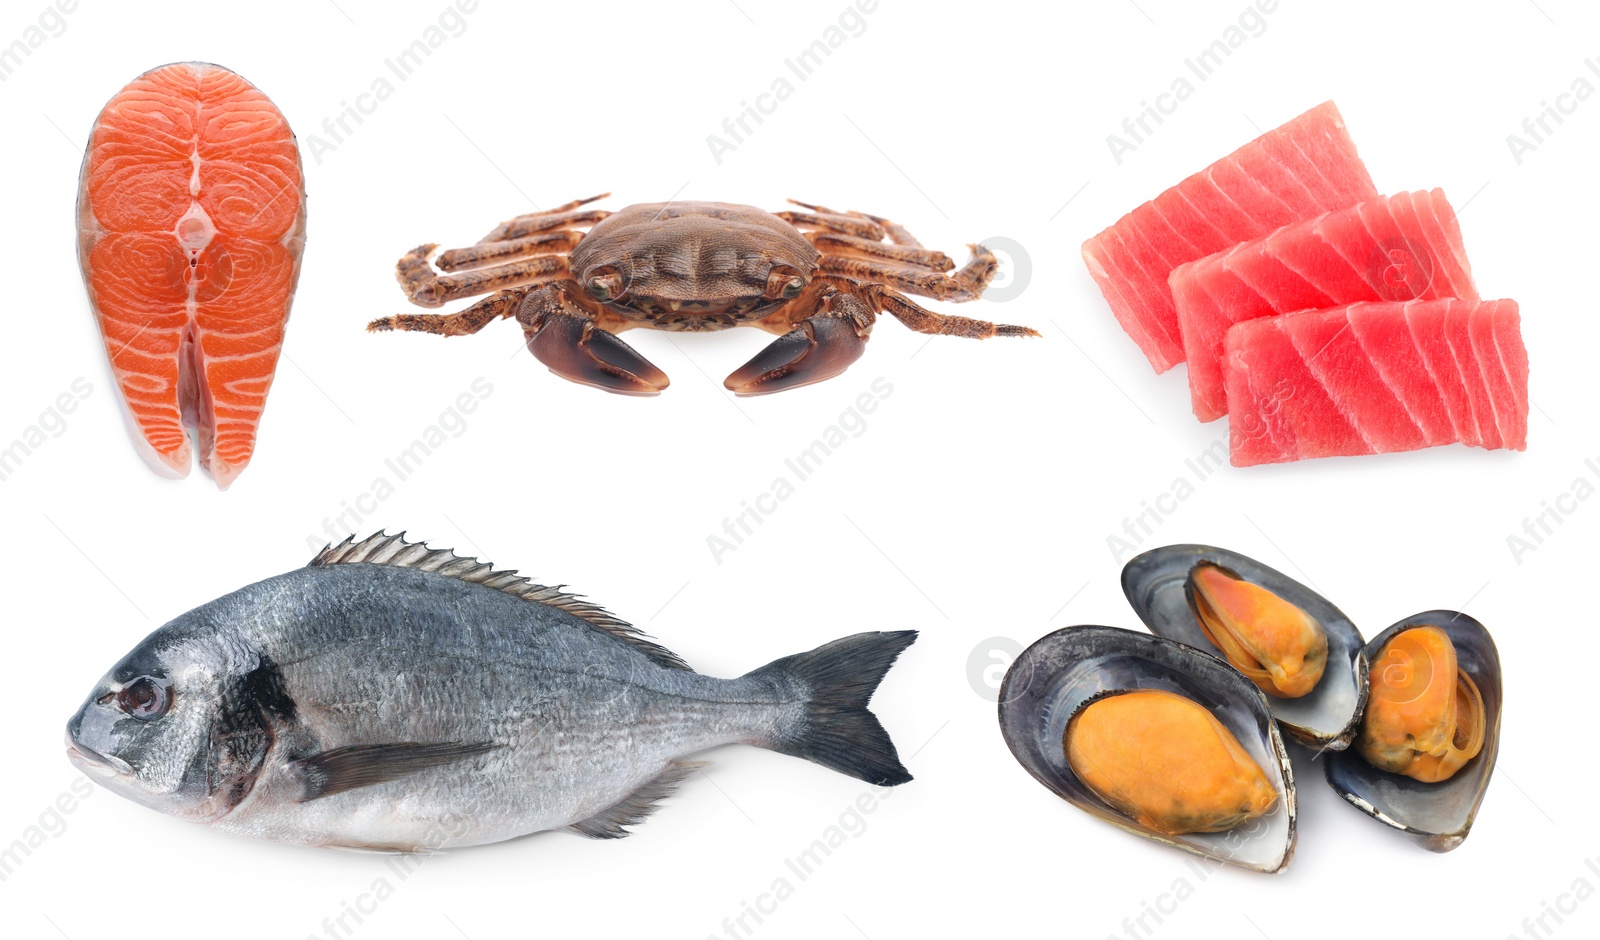 Image of Dorado fish, crab, salmon, pieces of raw tuna and mussels isolated on white, set